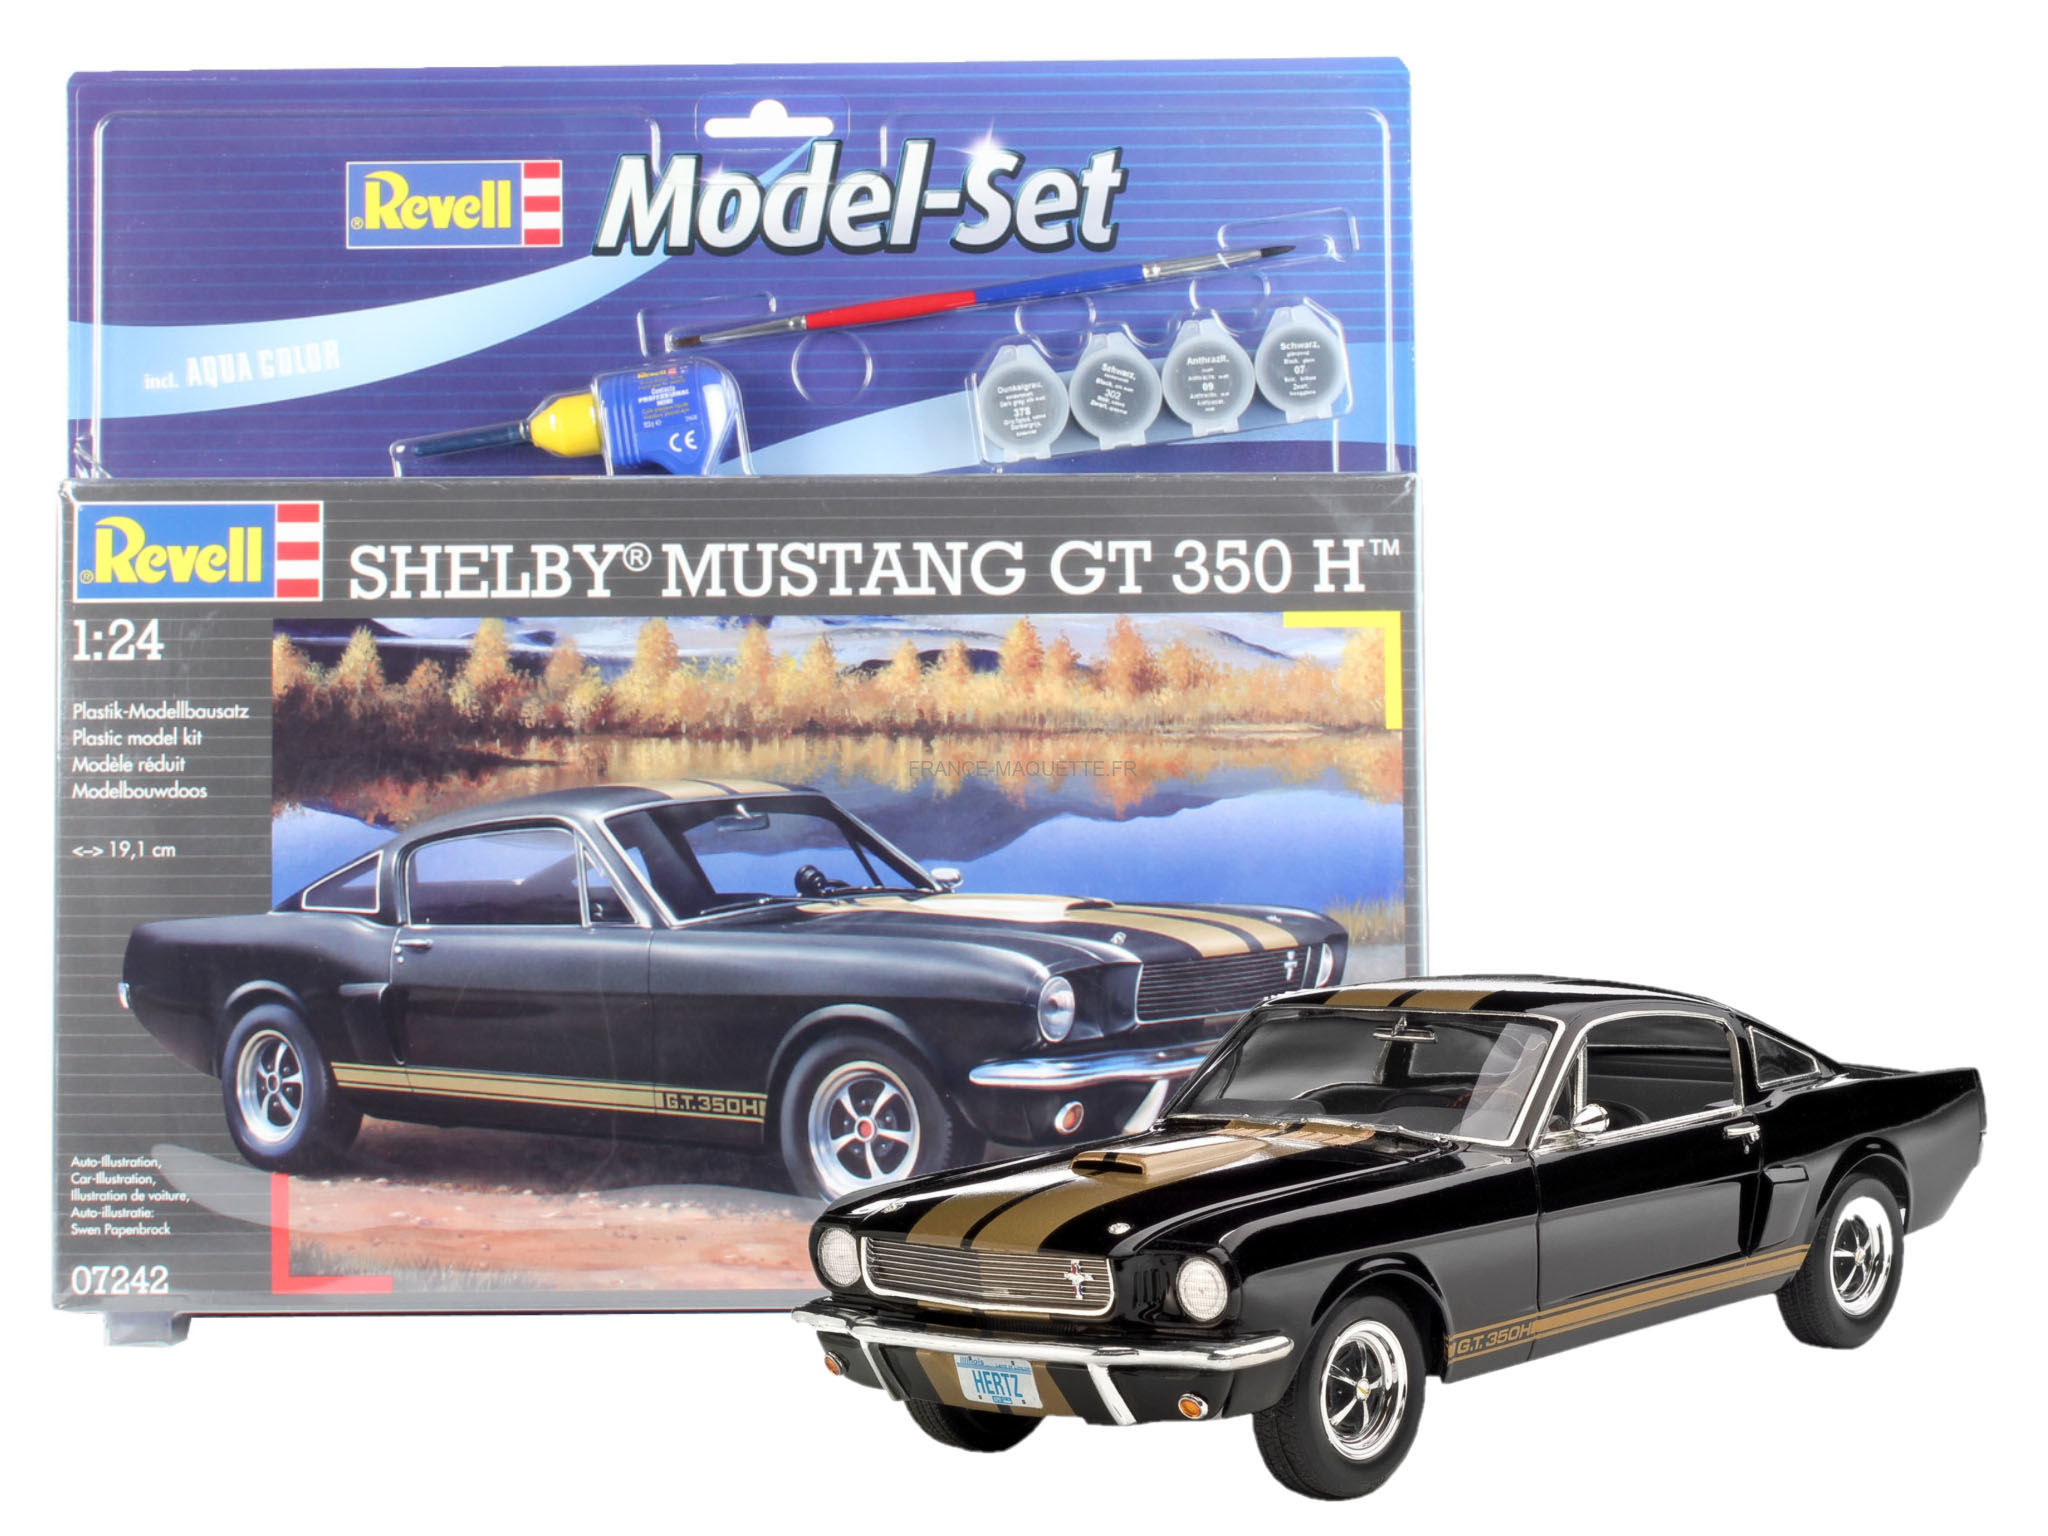 Maquette voiture Revell 1/24 07242 Shelby Mustang GT 350 H TM